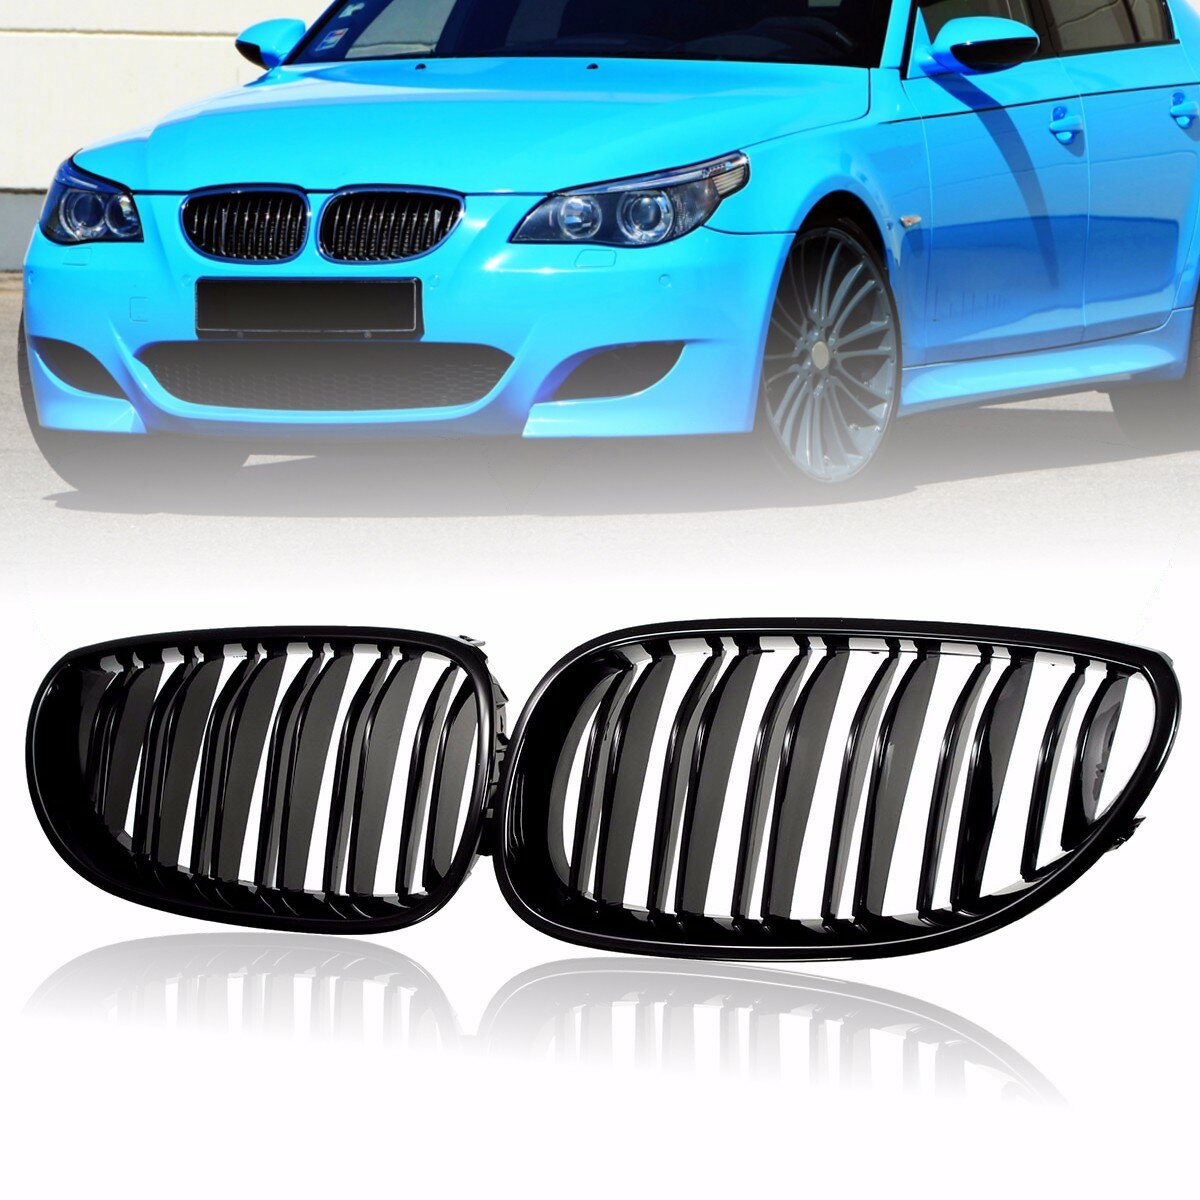 Voor BMW 5 SERIE E60 E61 M5 GLOSS FRONT NIERGRILLE GRILL TWIN SLAT 2004-2010